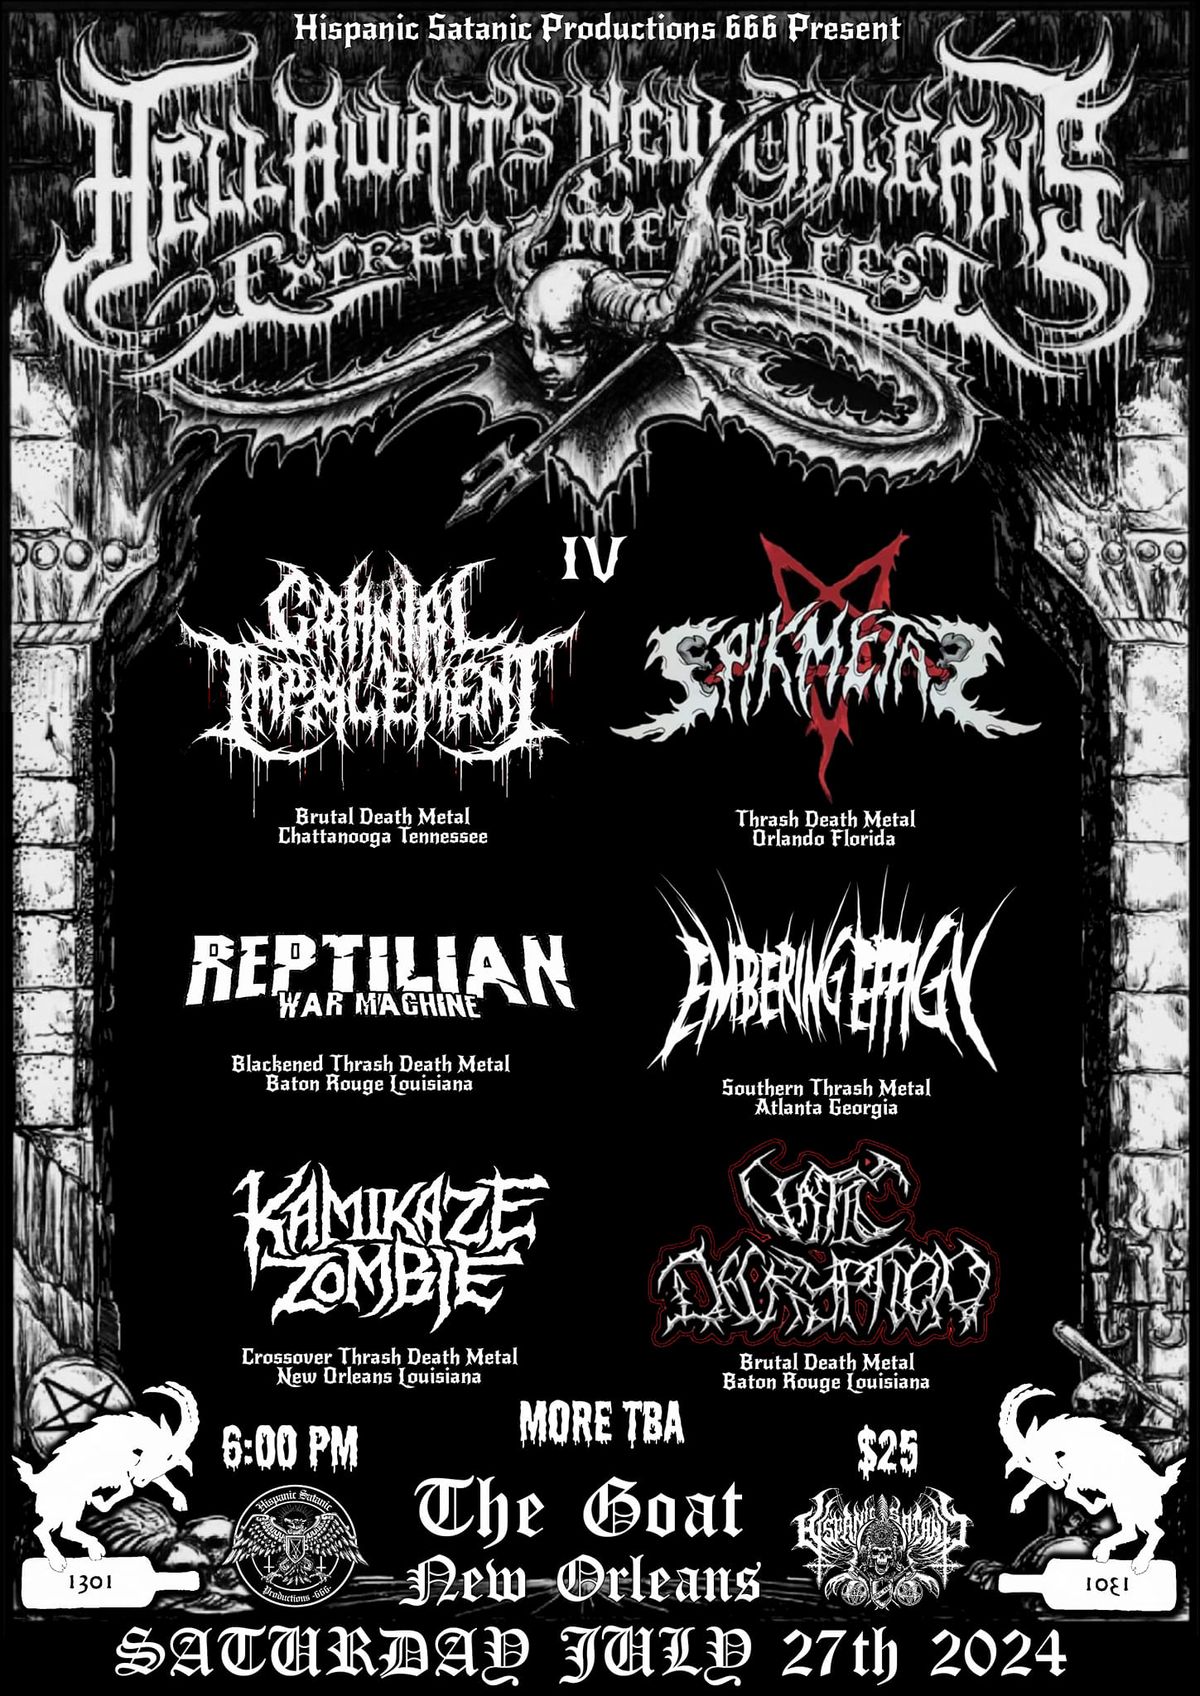 HELL AWAITS NEW ORLEANS EXTREME METAL FEST IV 